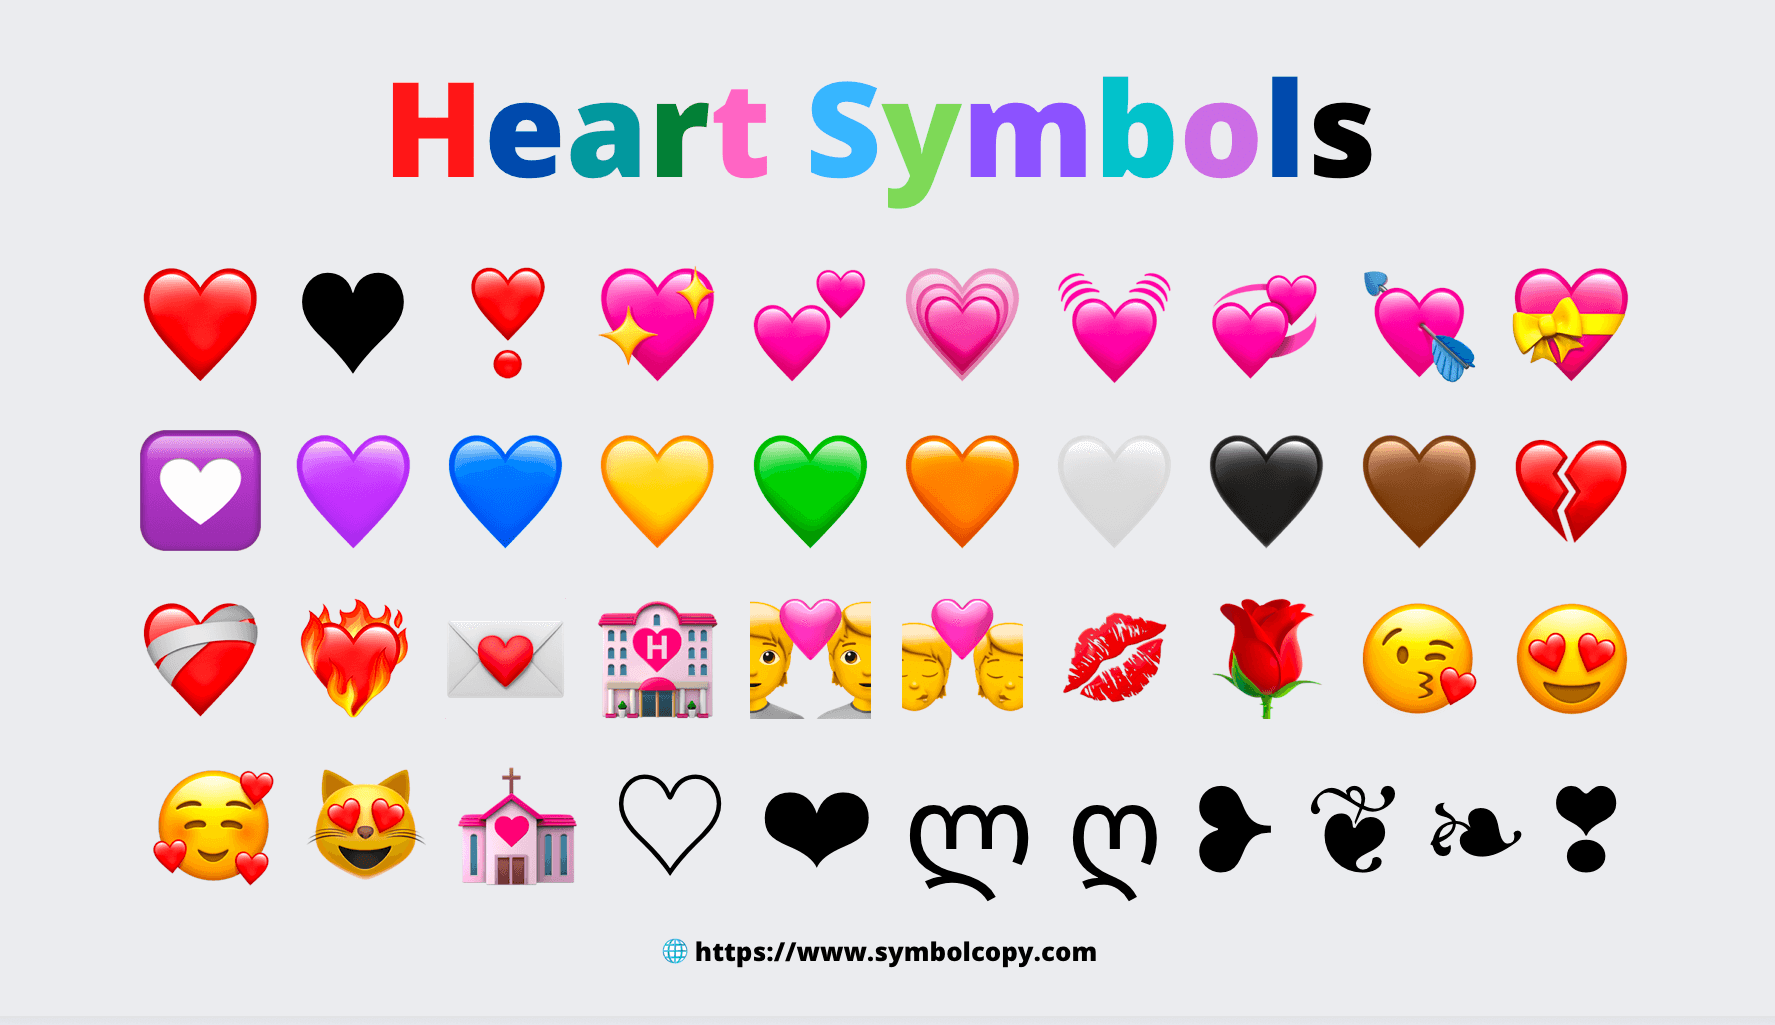 Heart Symbol Copy and Paste ♡💕❤💘❣💔♥💗❦💖😘